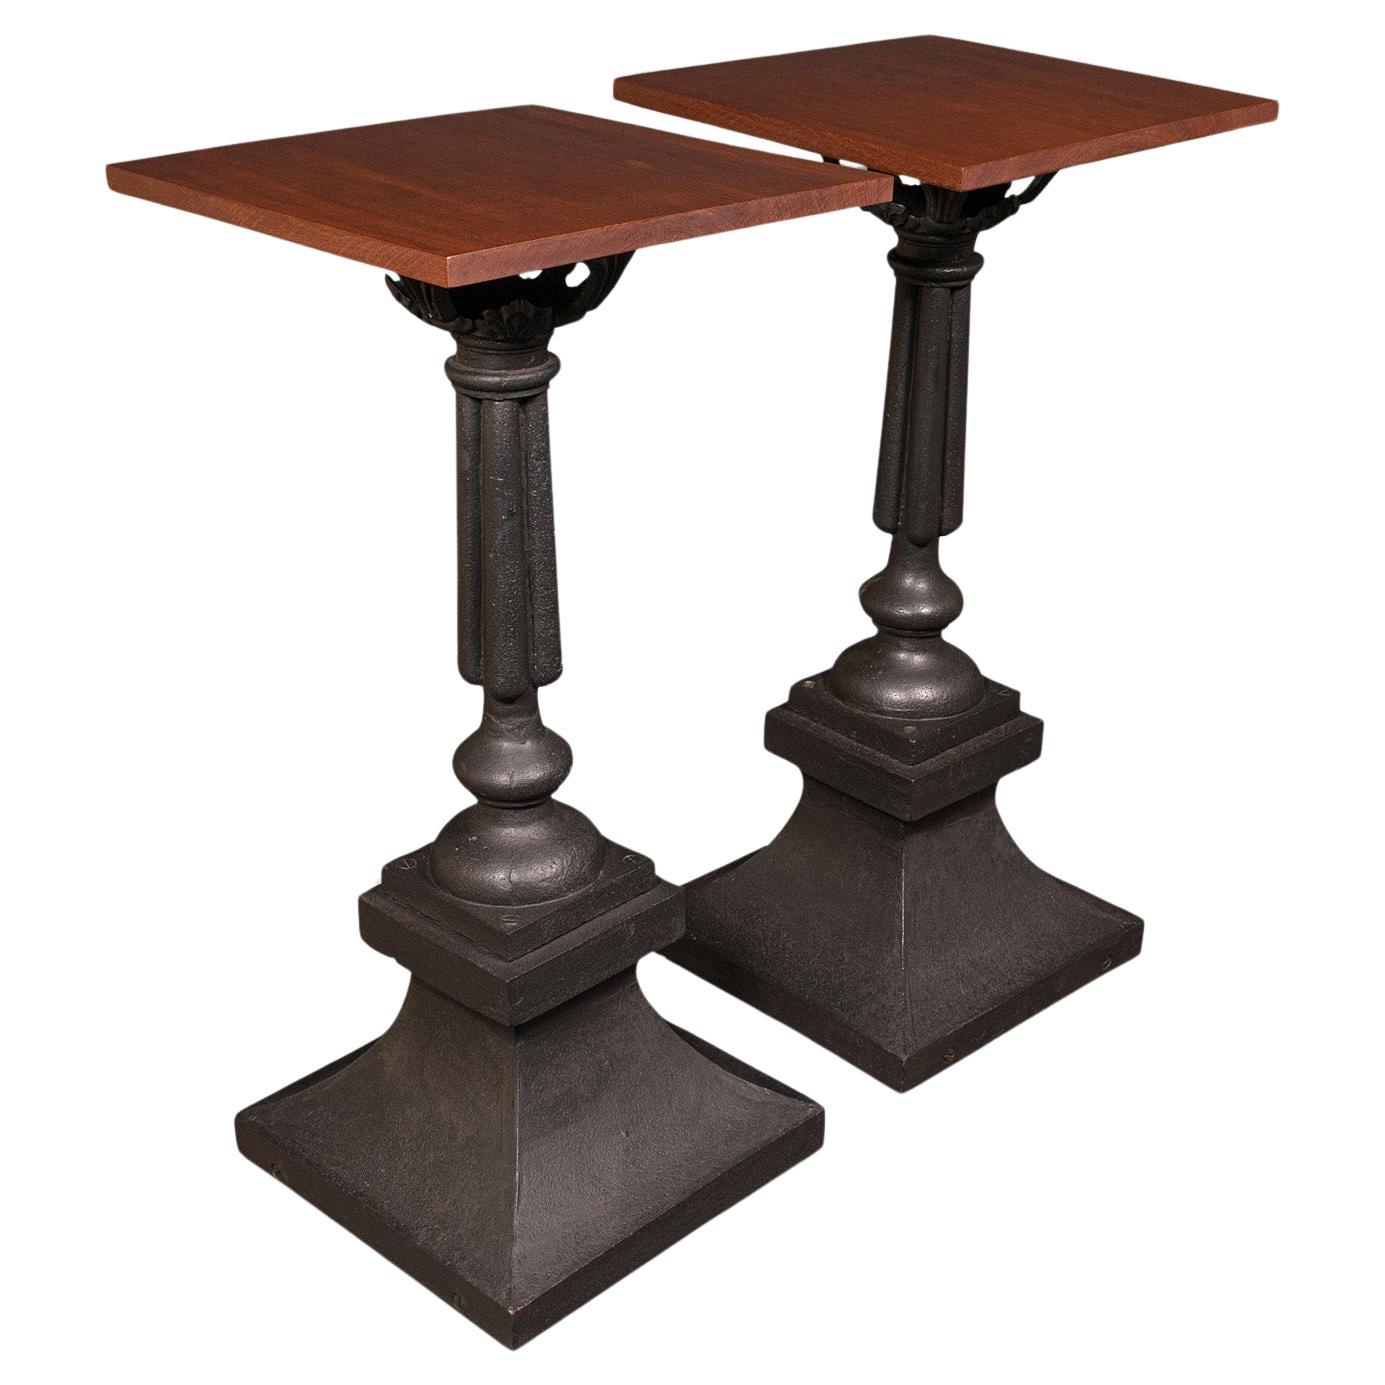 Heavy Pair Of Portico Tables, English, Iron, Statuary, Planter Stand, Victorian